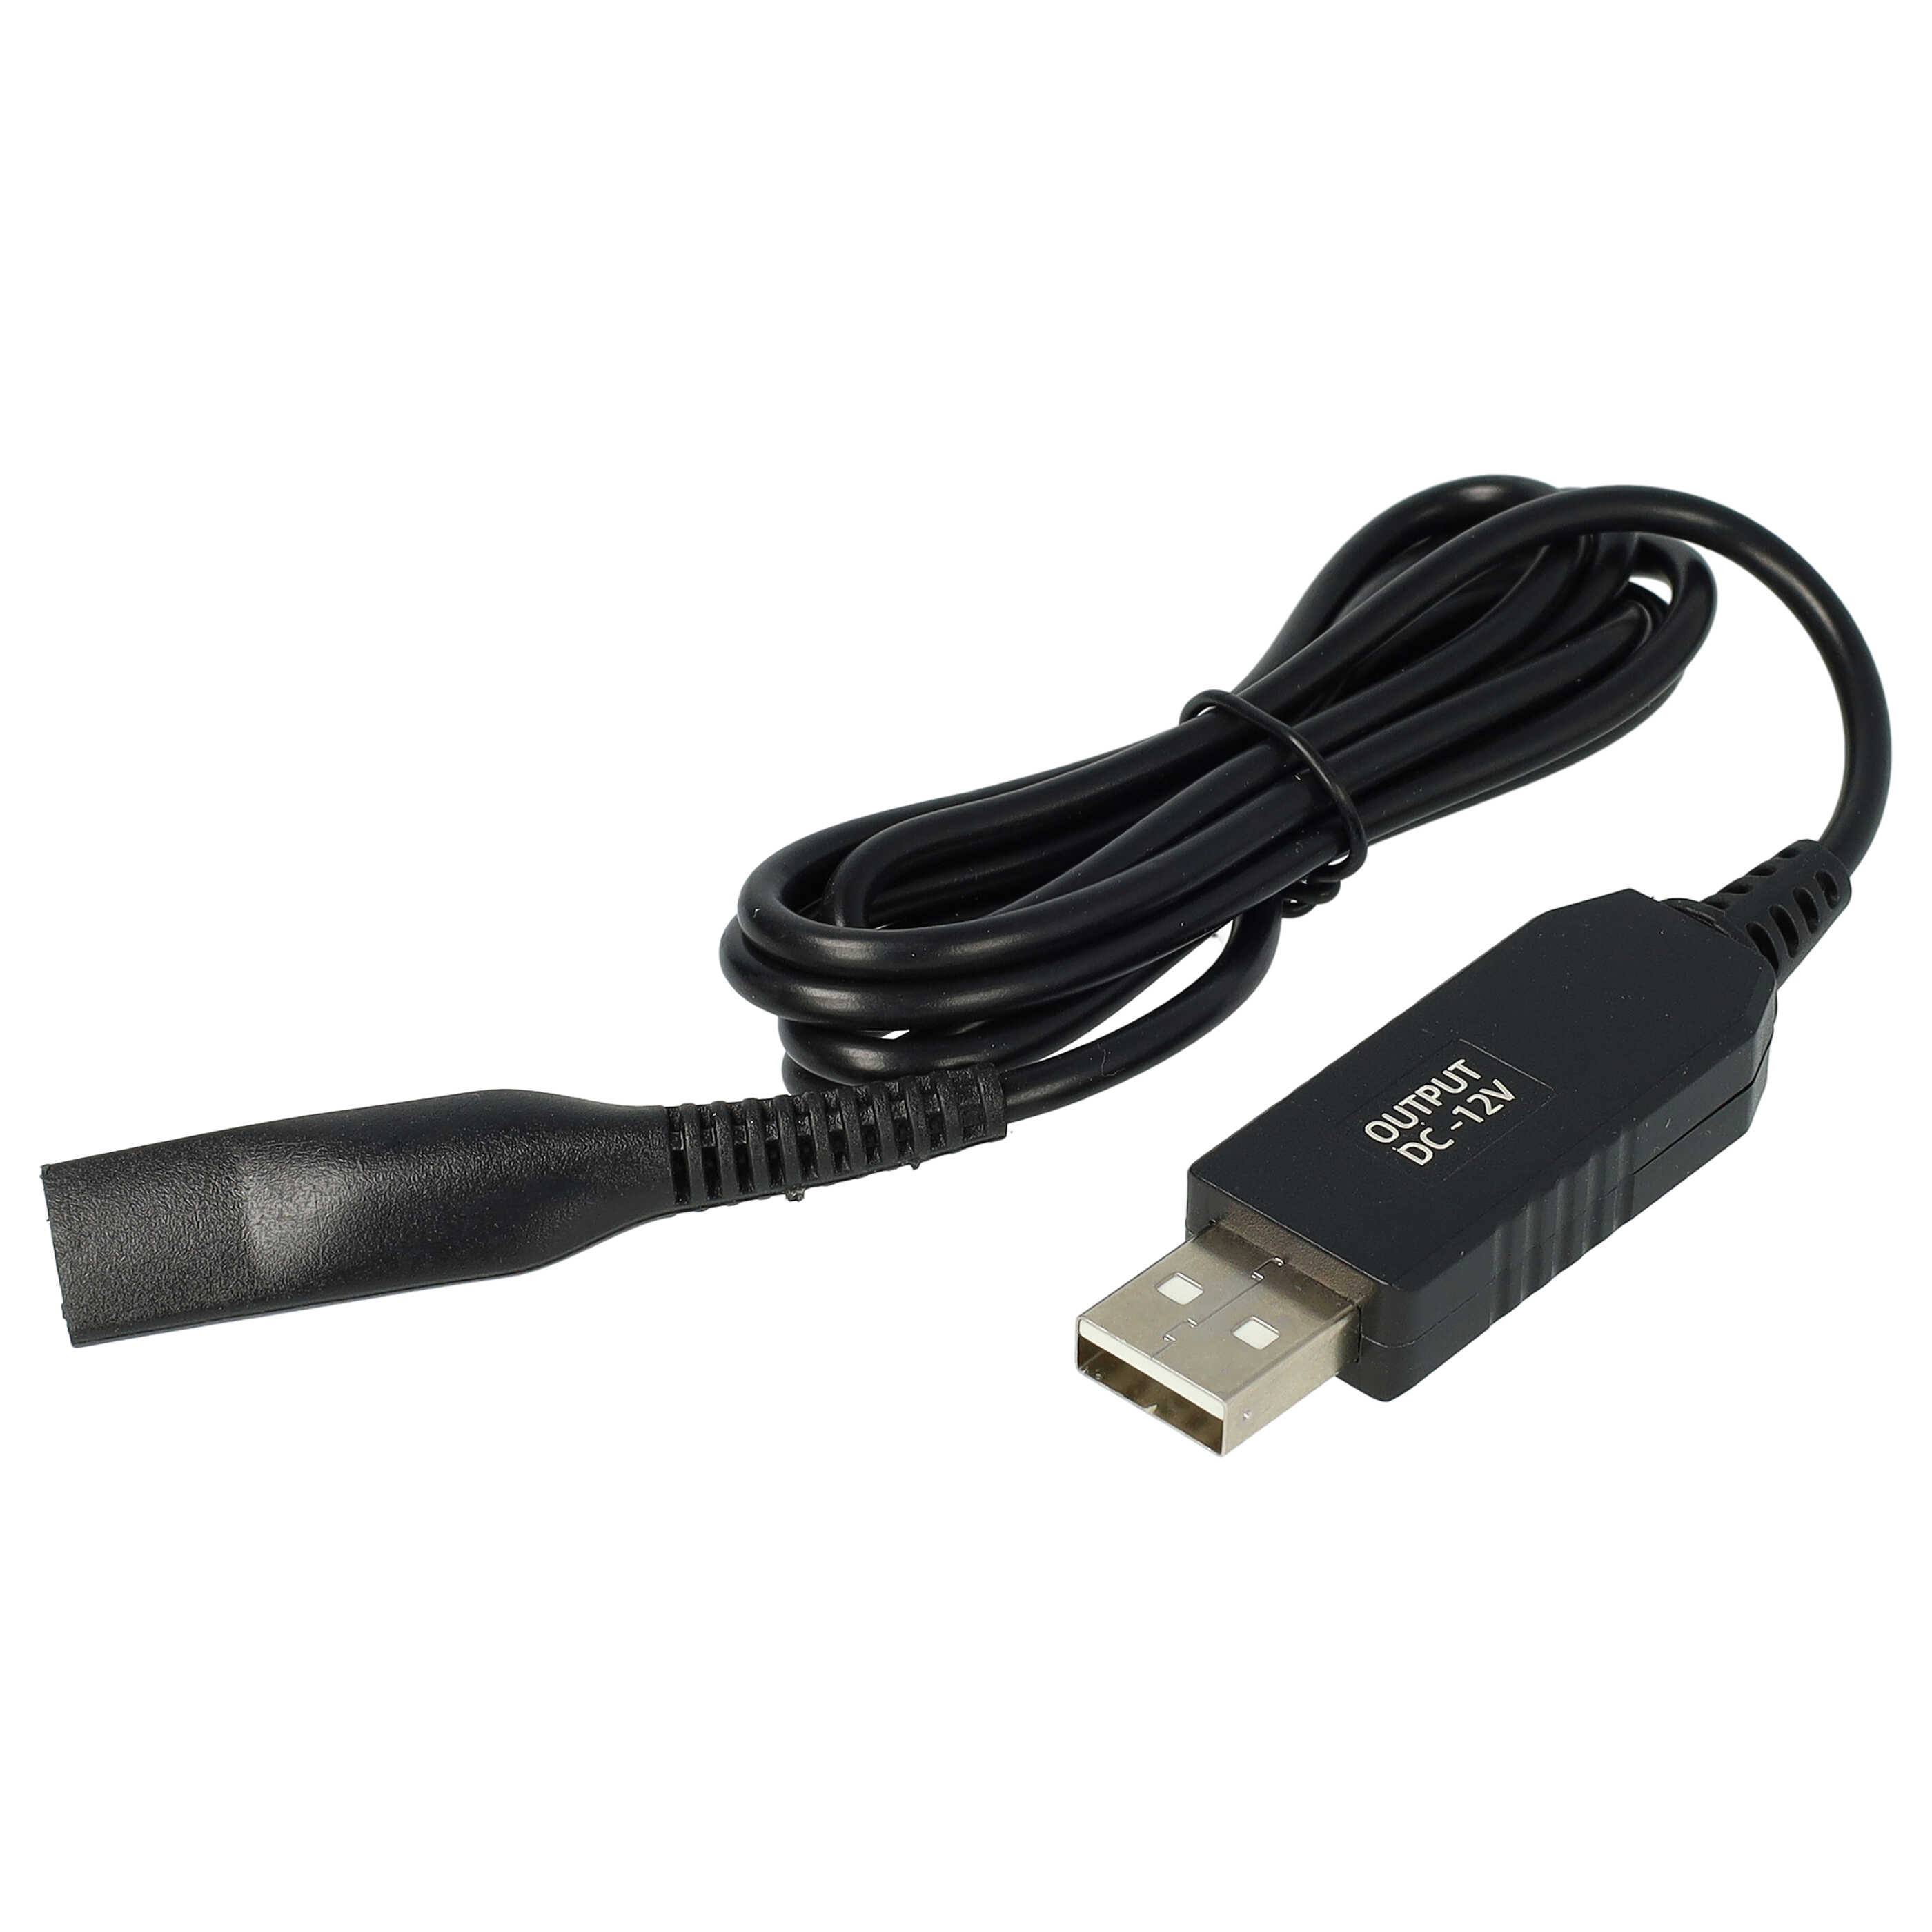 USB Charging Cable suitable for HC20 Braun, Oral-B HC20 Shaver, Epilator, Toothbrush etc. - 120 cm